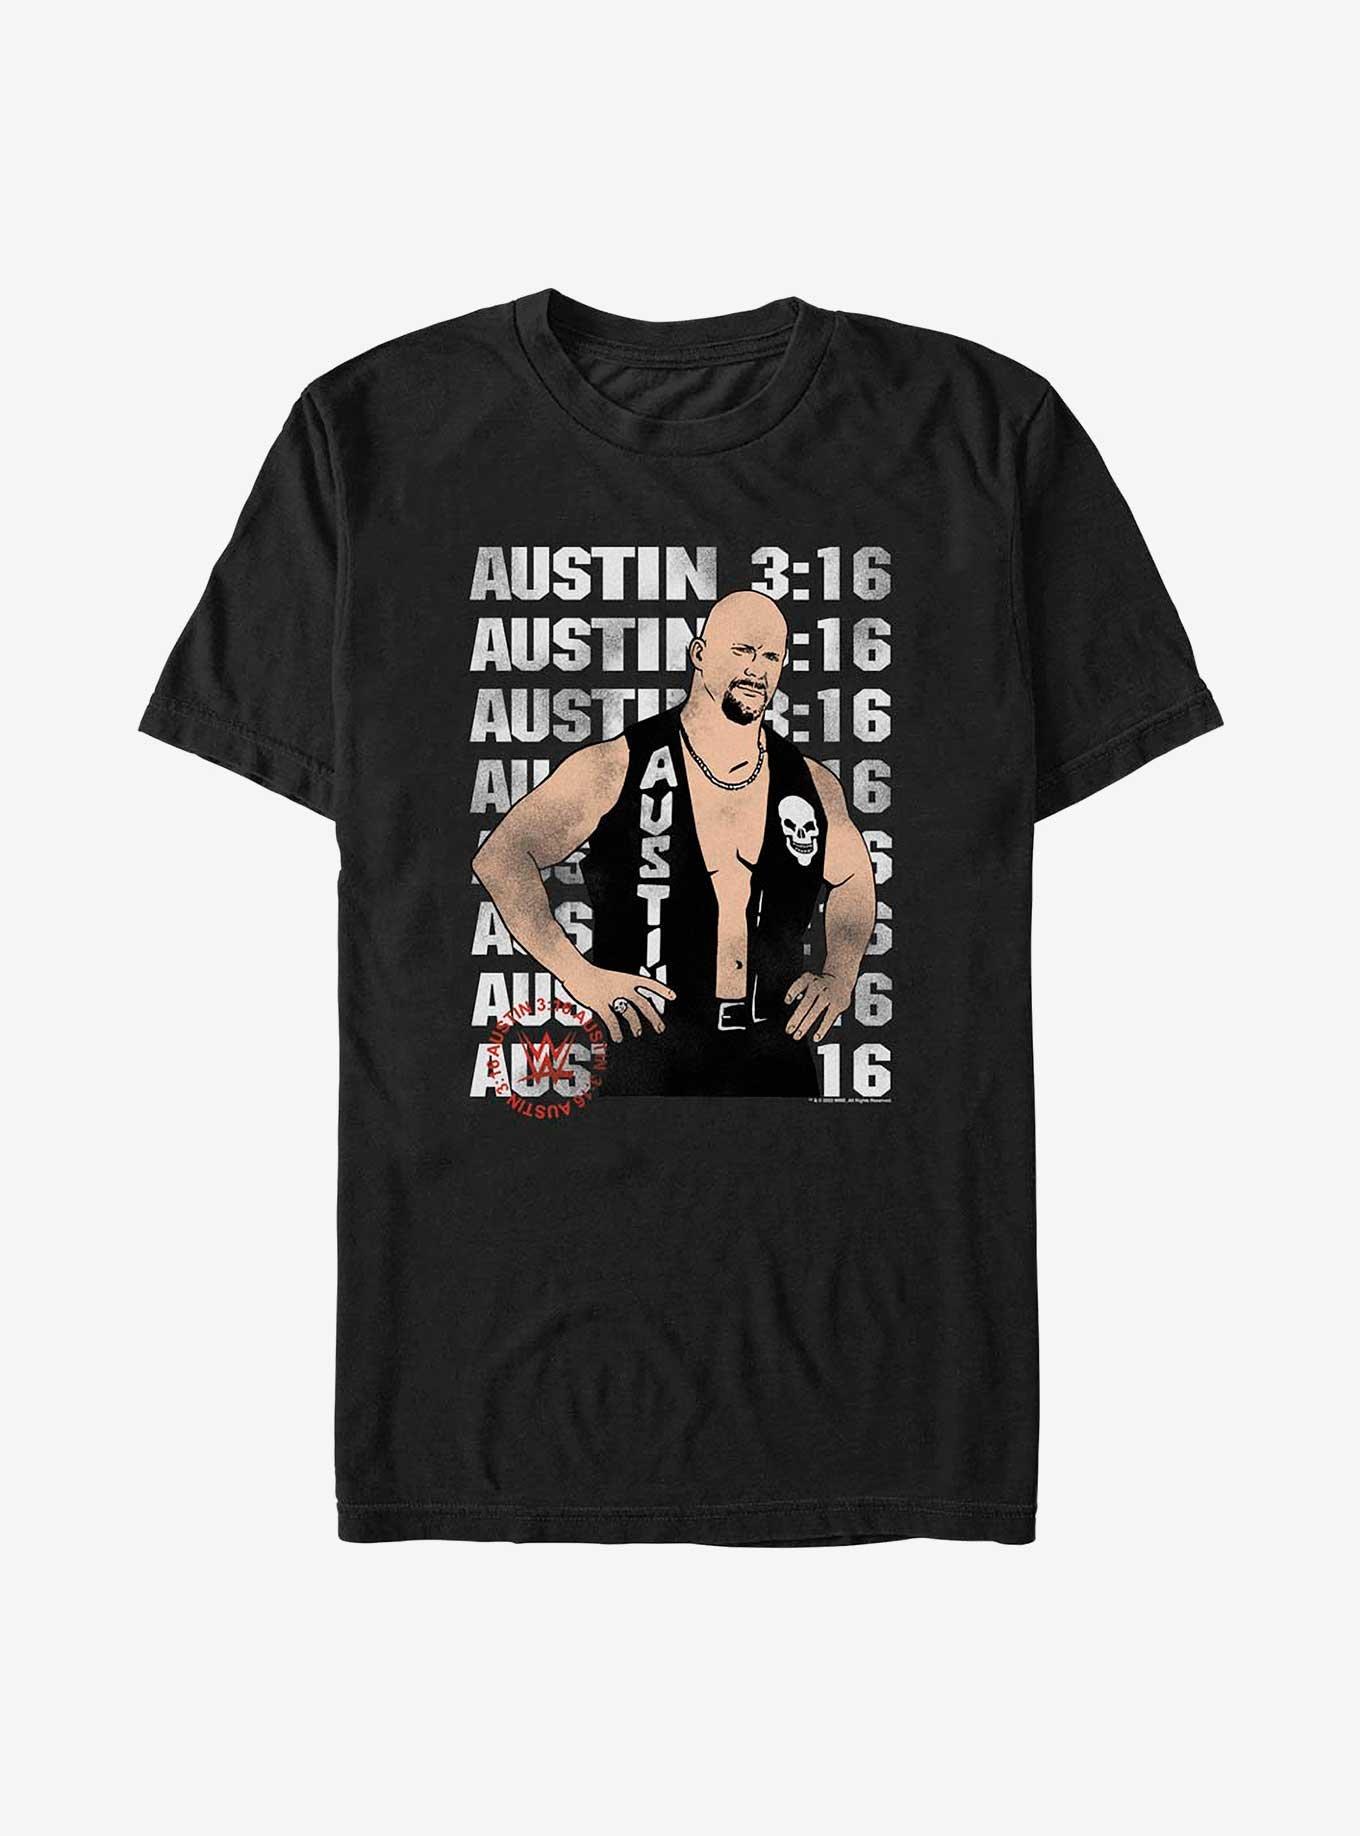 Official Steve Austin Stone Cold 316 T-shirt Ladies Tee